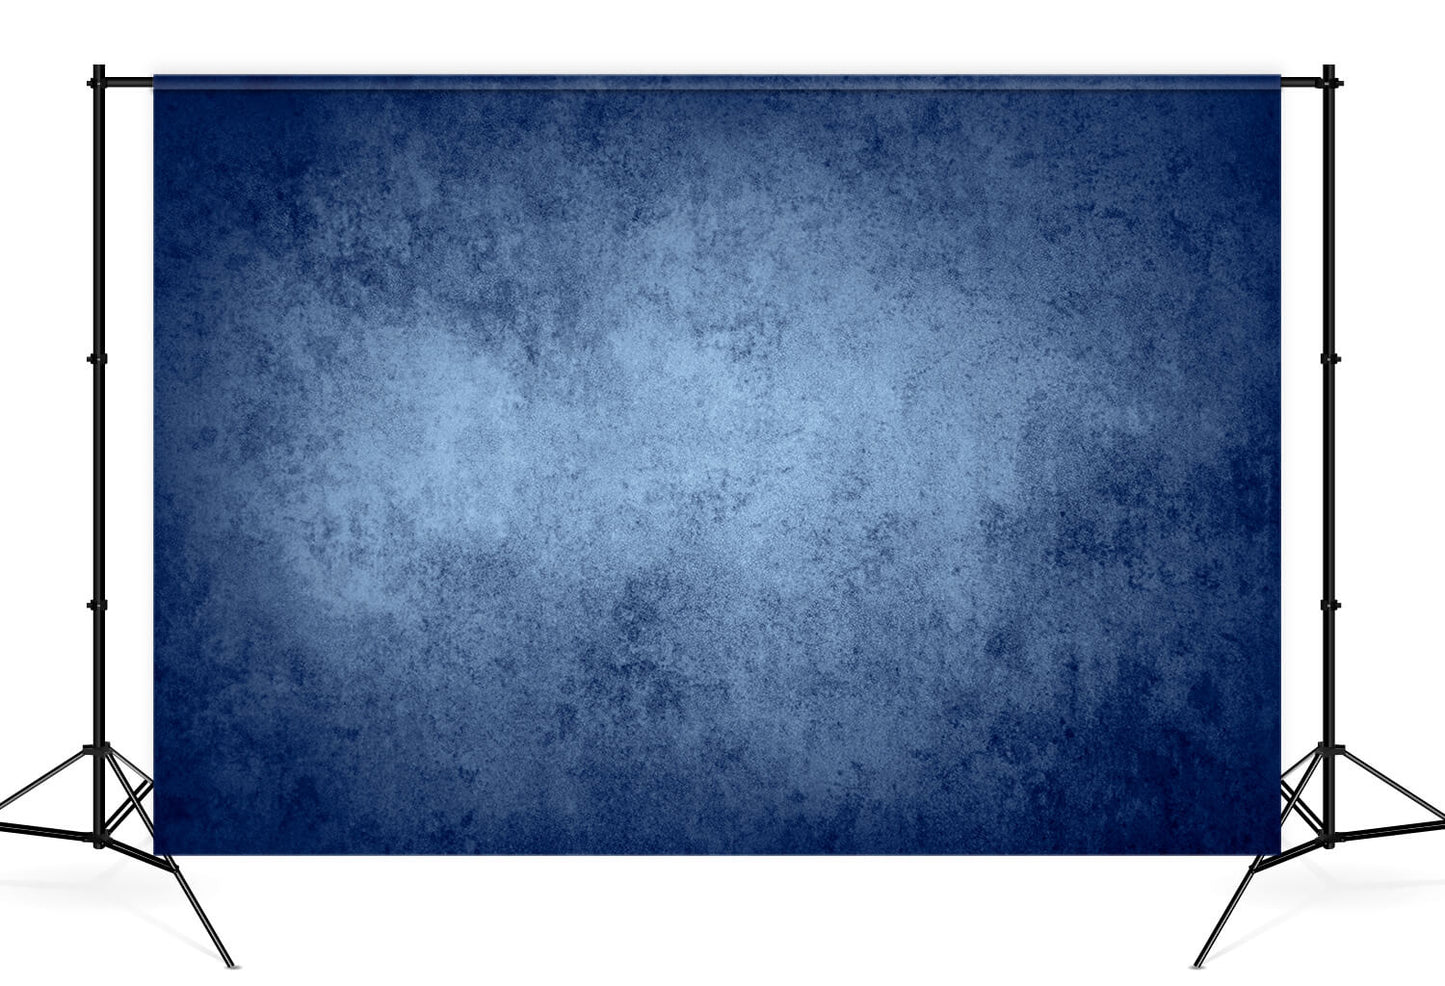 Retro Blue Abstract Mottled Photography Backdrop M10-35